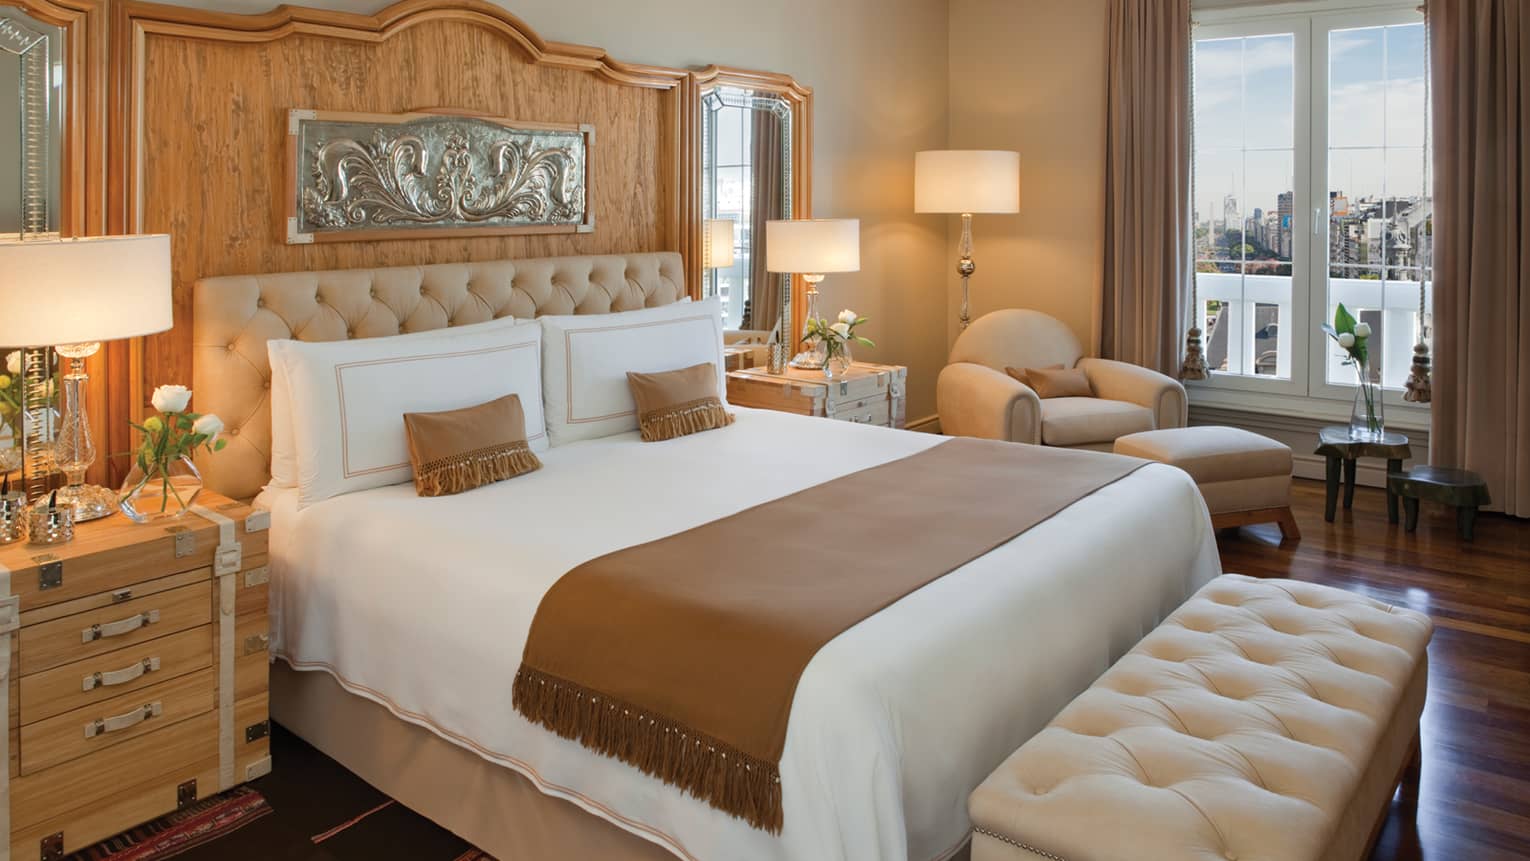 A large bed in the centre of a guest suite.